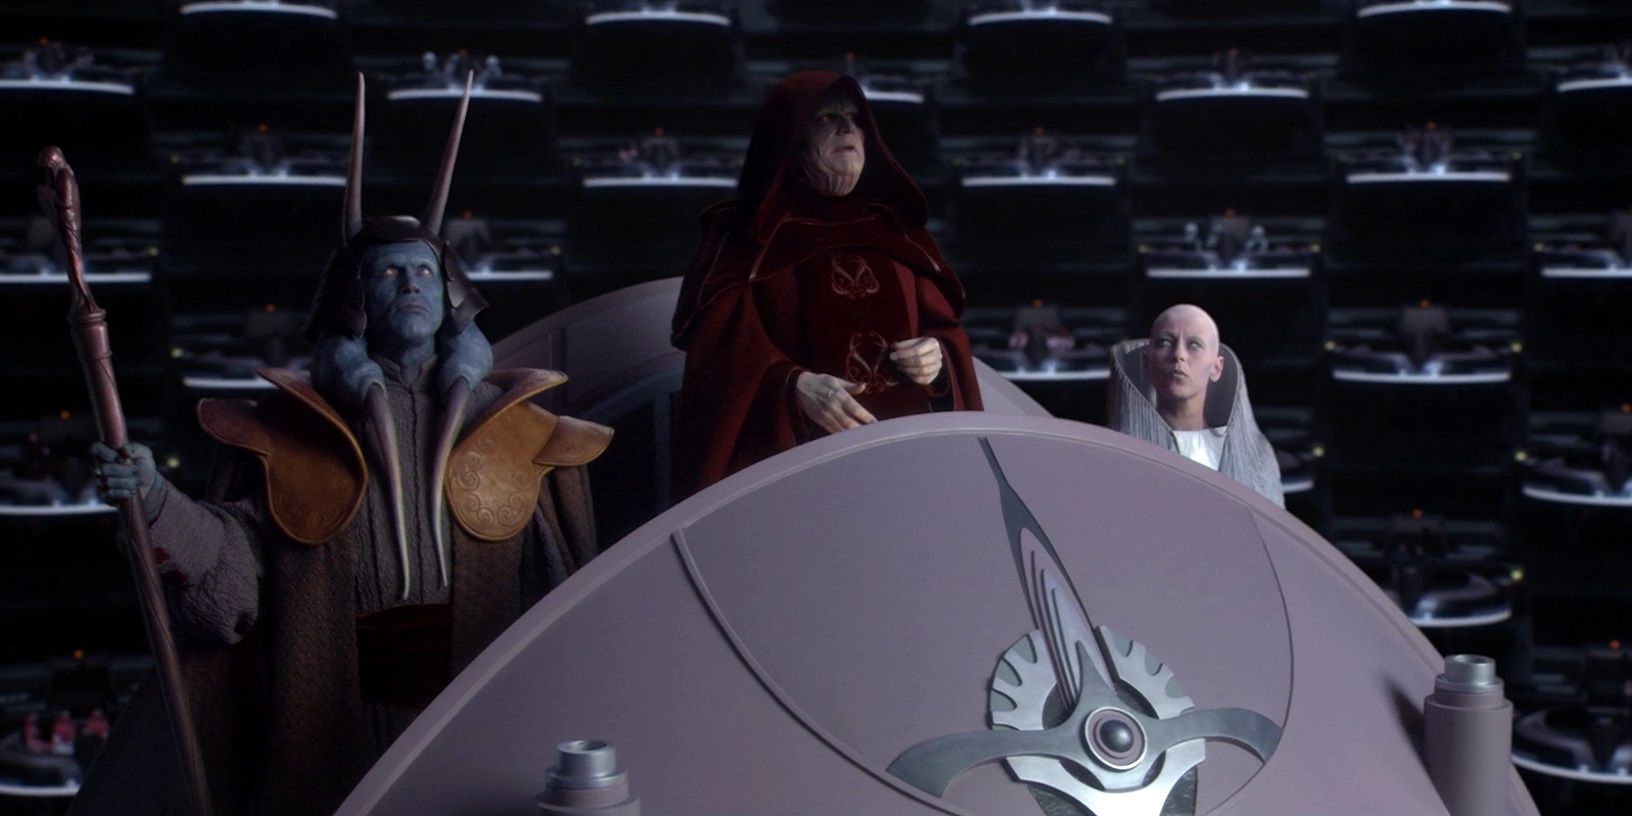 Palpatine turns the Republic into the Empire